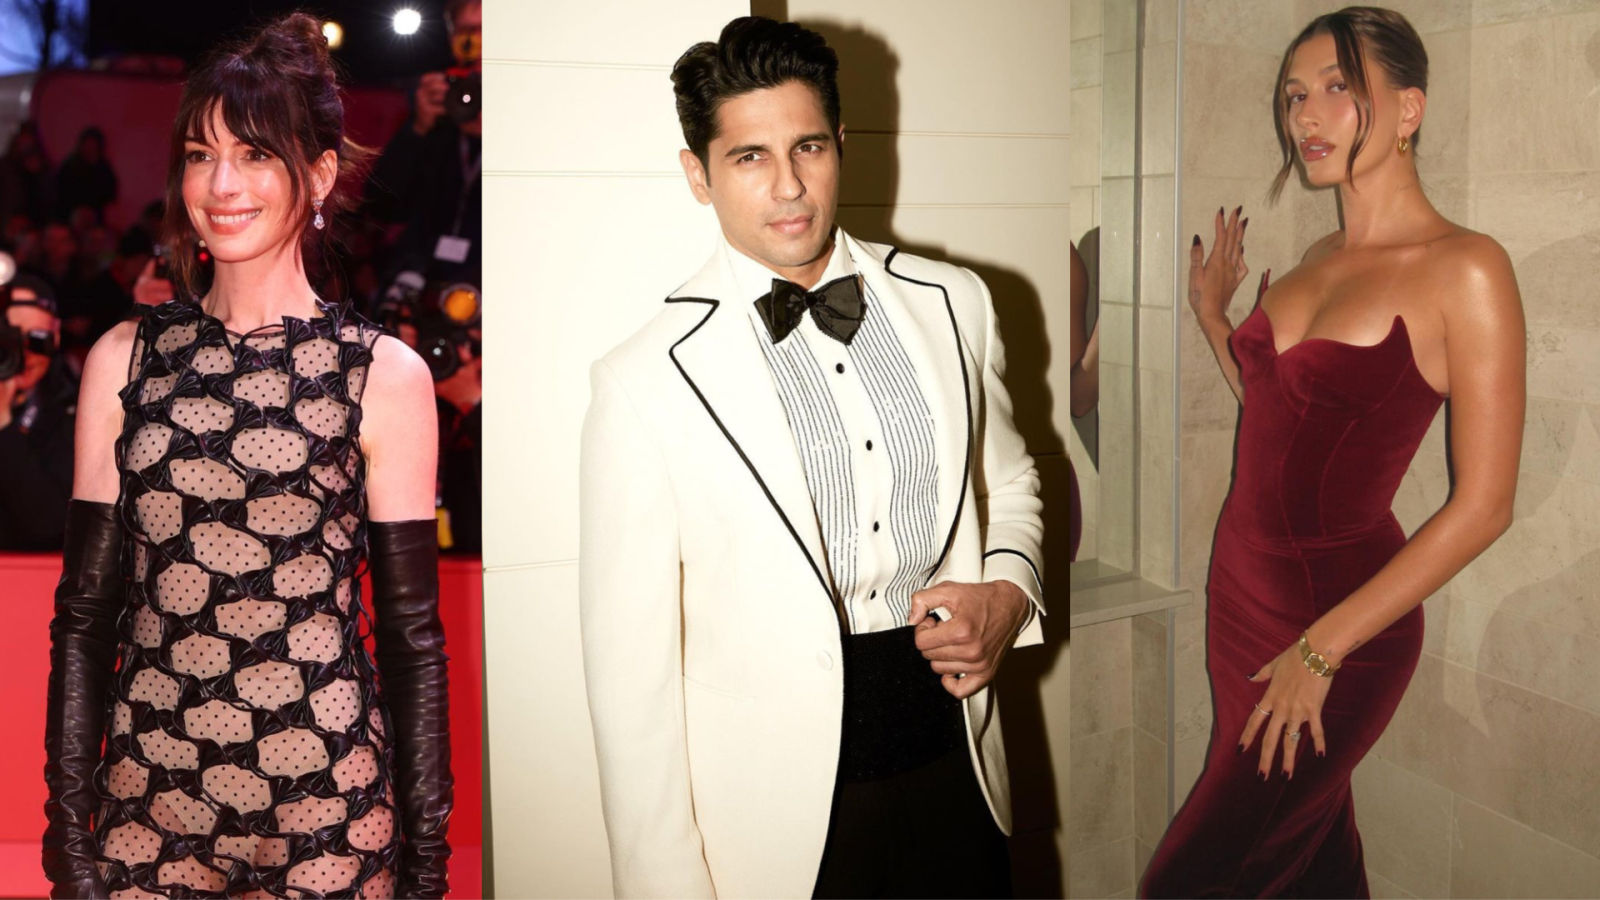 New Year Party outfit: Celebrity-inspired trends from East to West